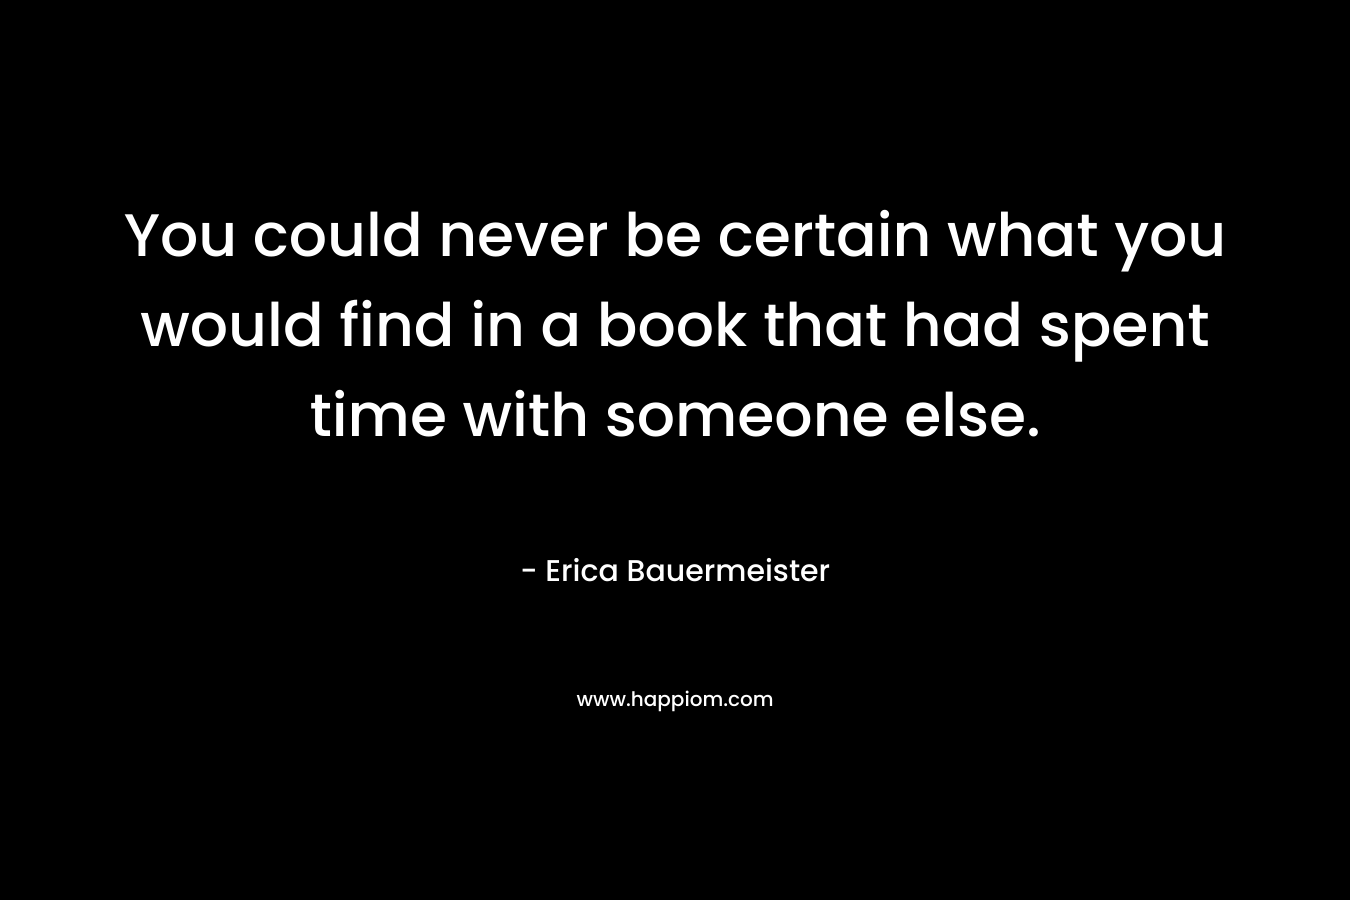 You could never be certain what you would find in a book that had spent time with someone else. – Erica Bauermeister